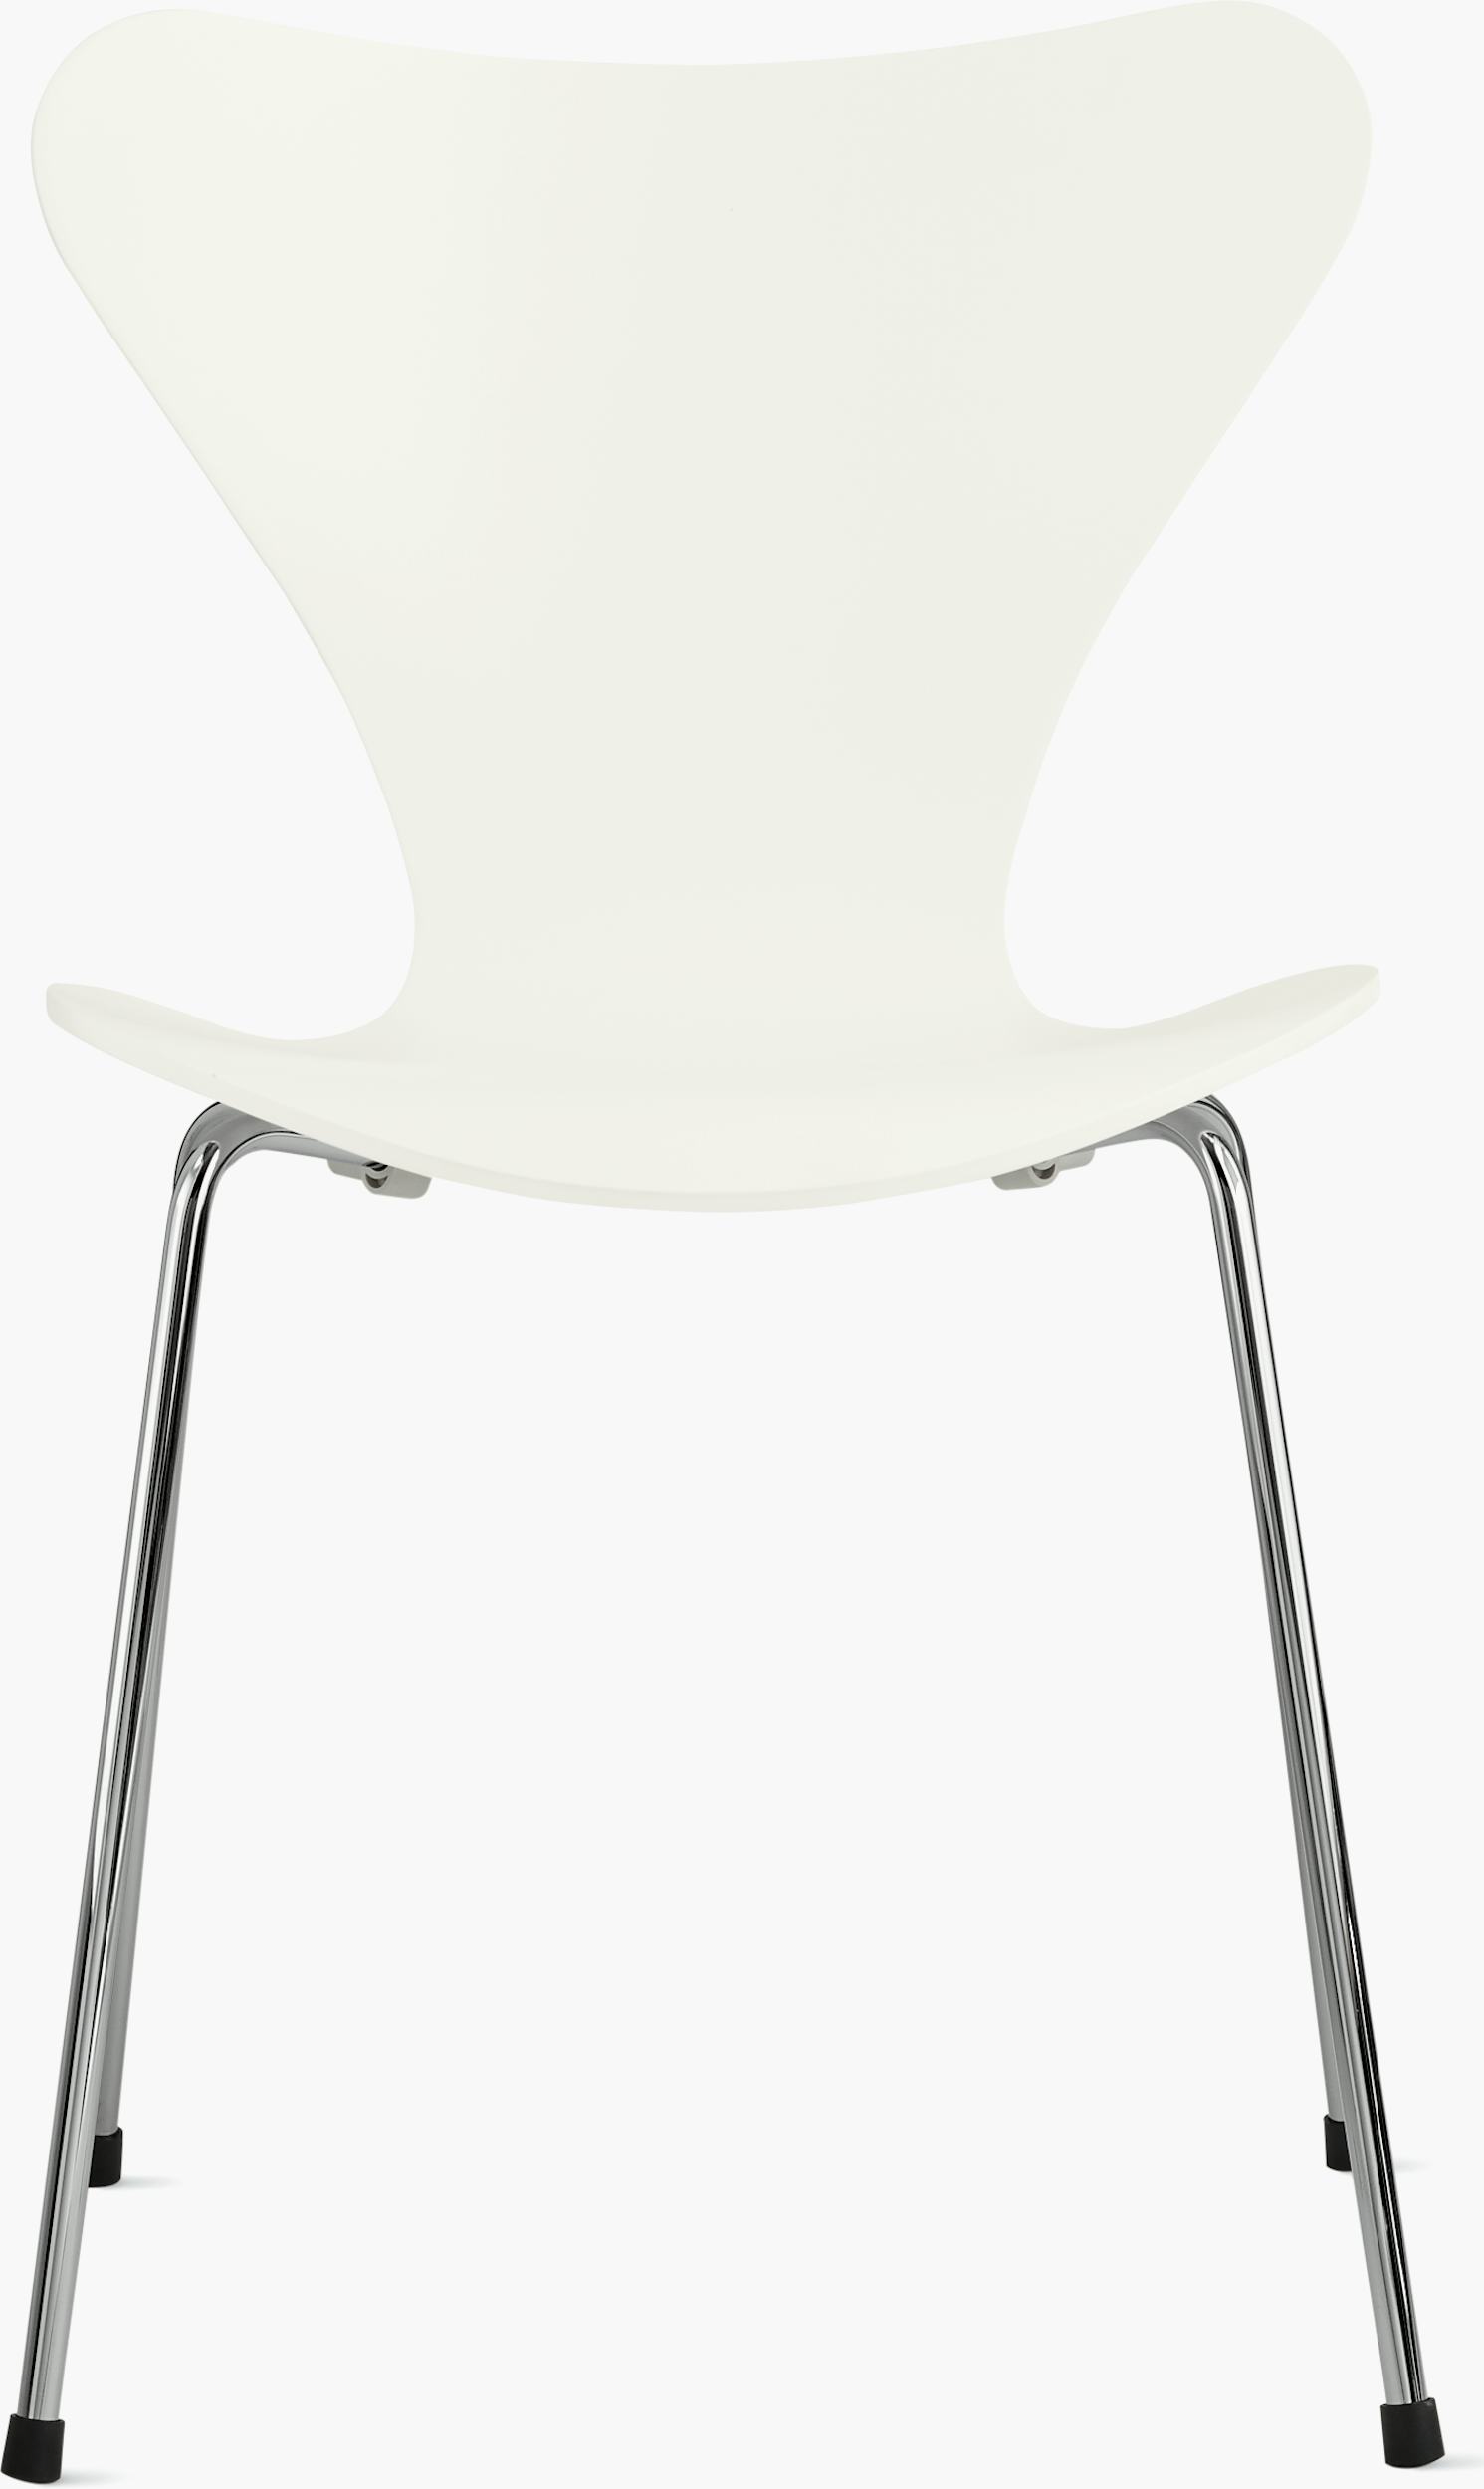 Chair Seat Risers for Arne Jacobsen Chairs, White